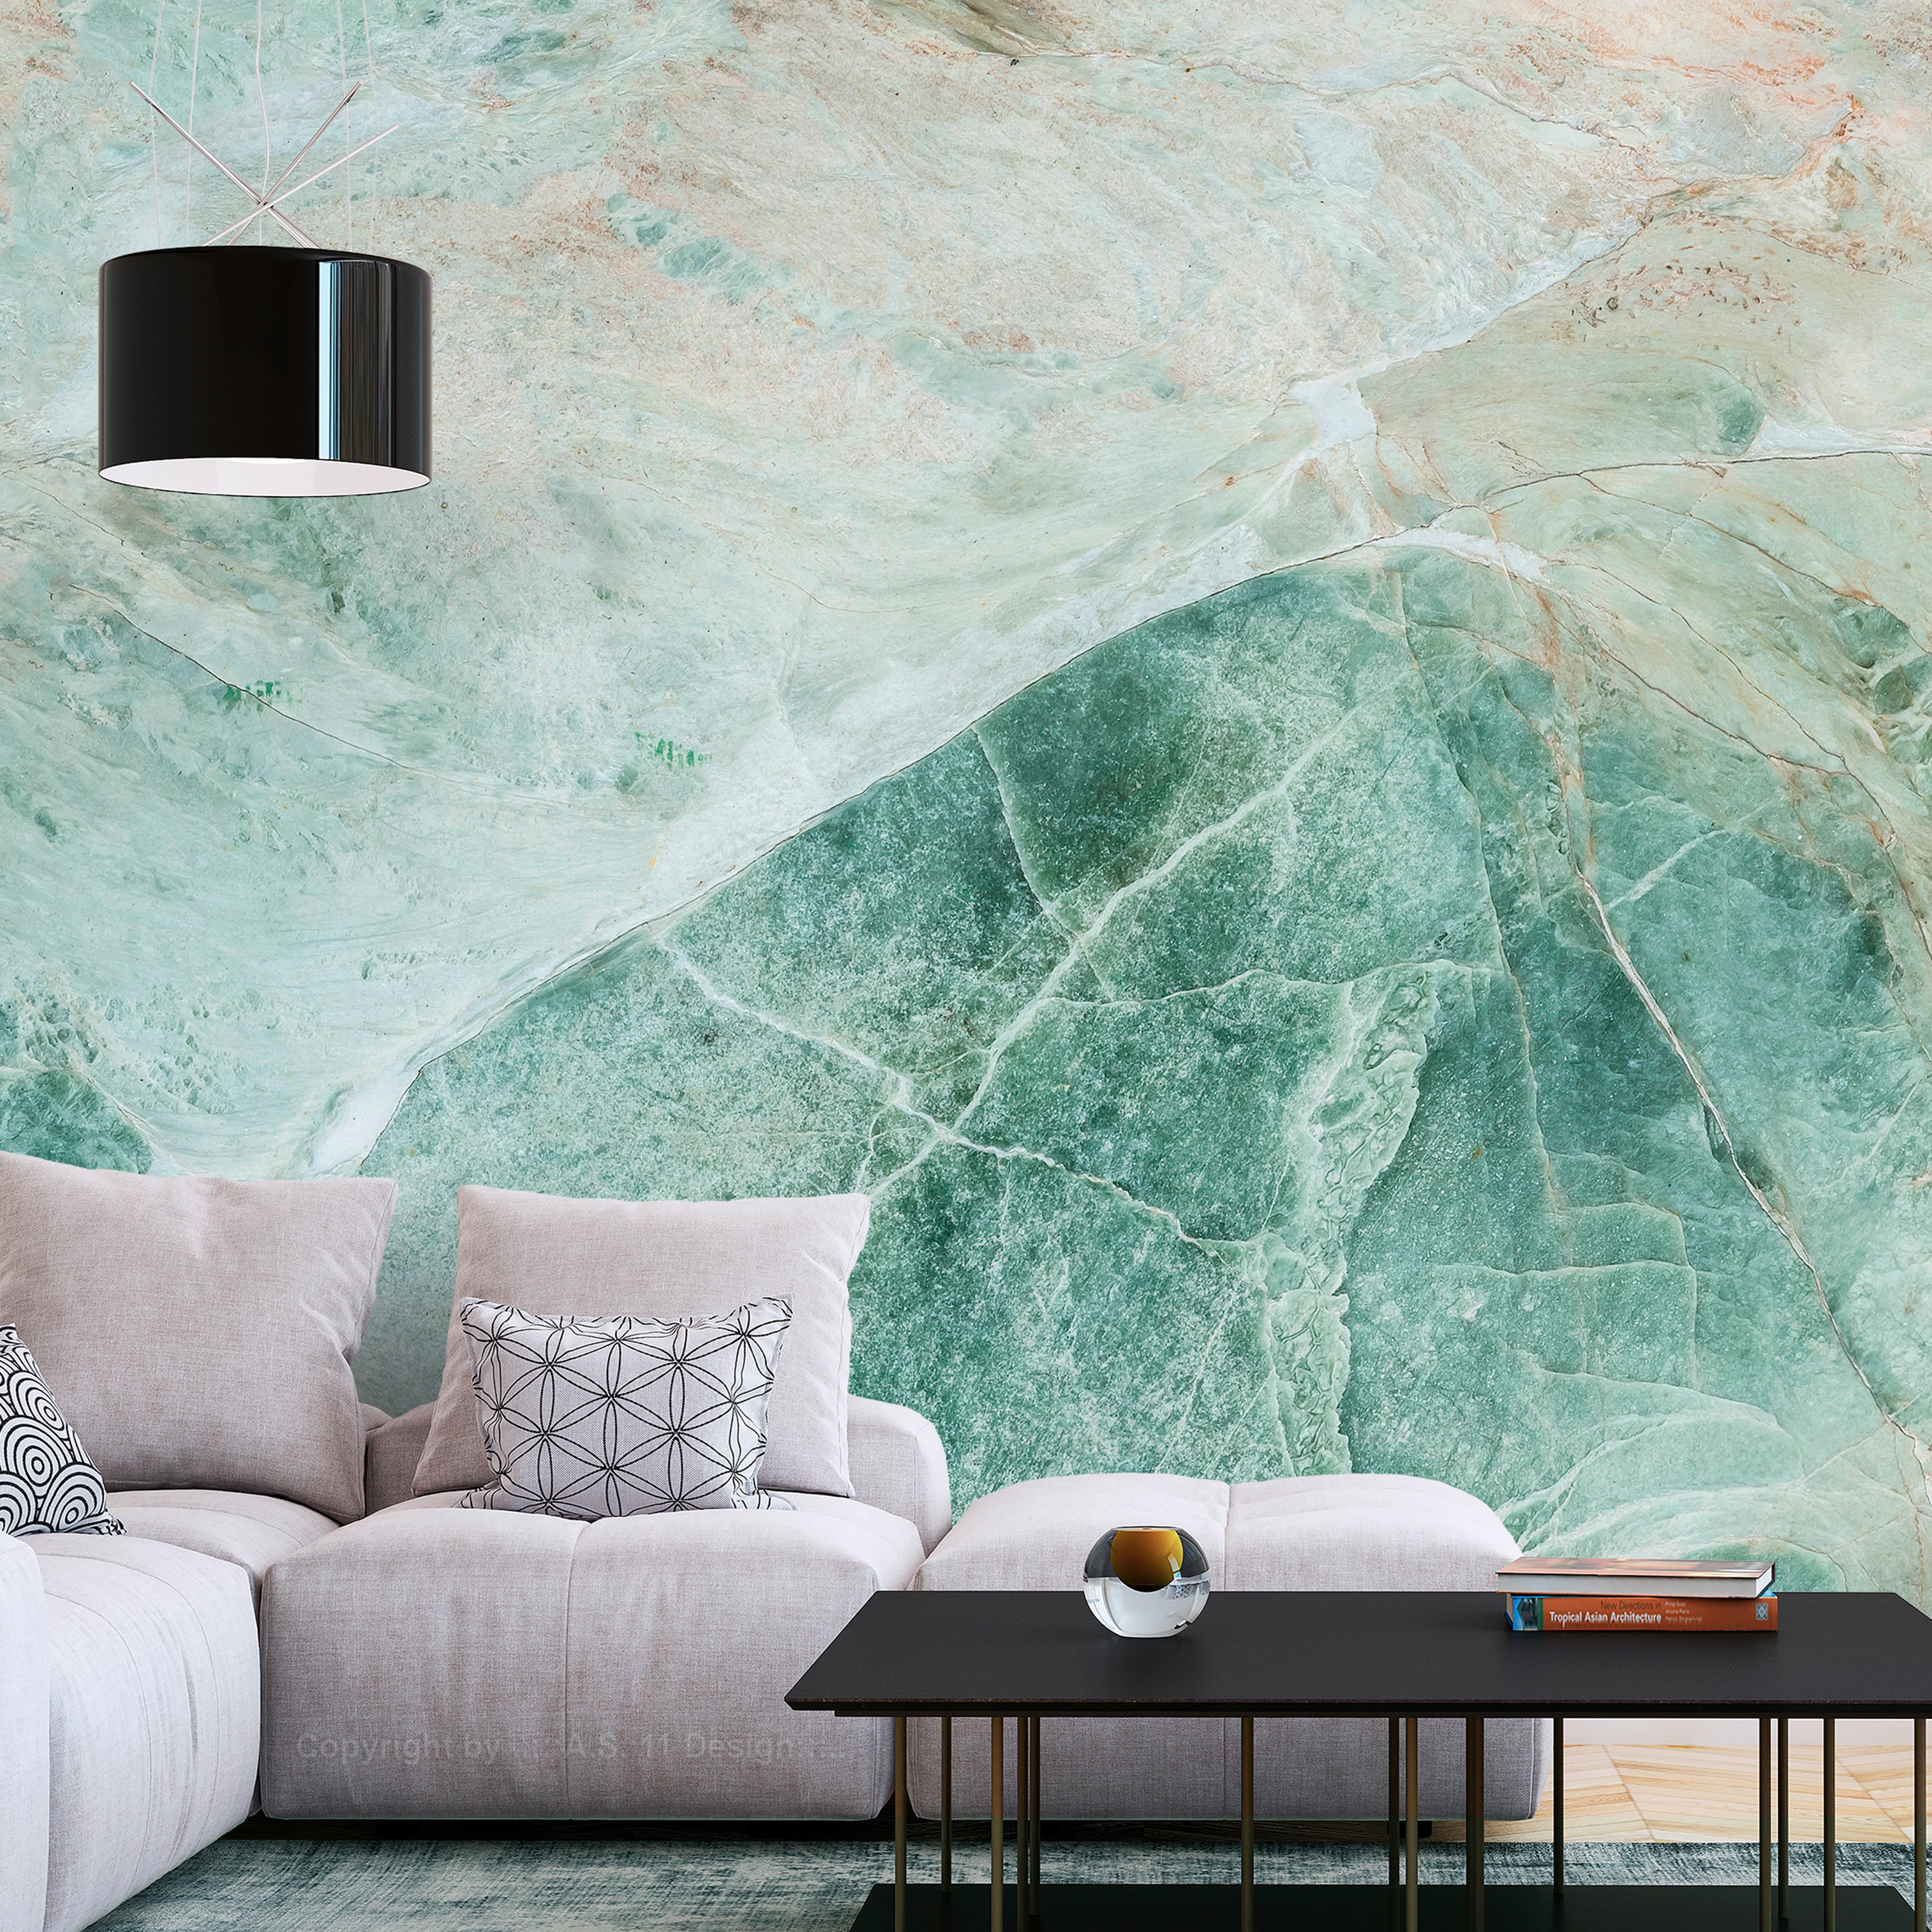 Self-adhesive Wallpaper - Turquoise Marble - 147x105